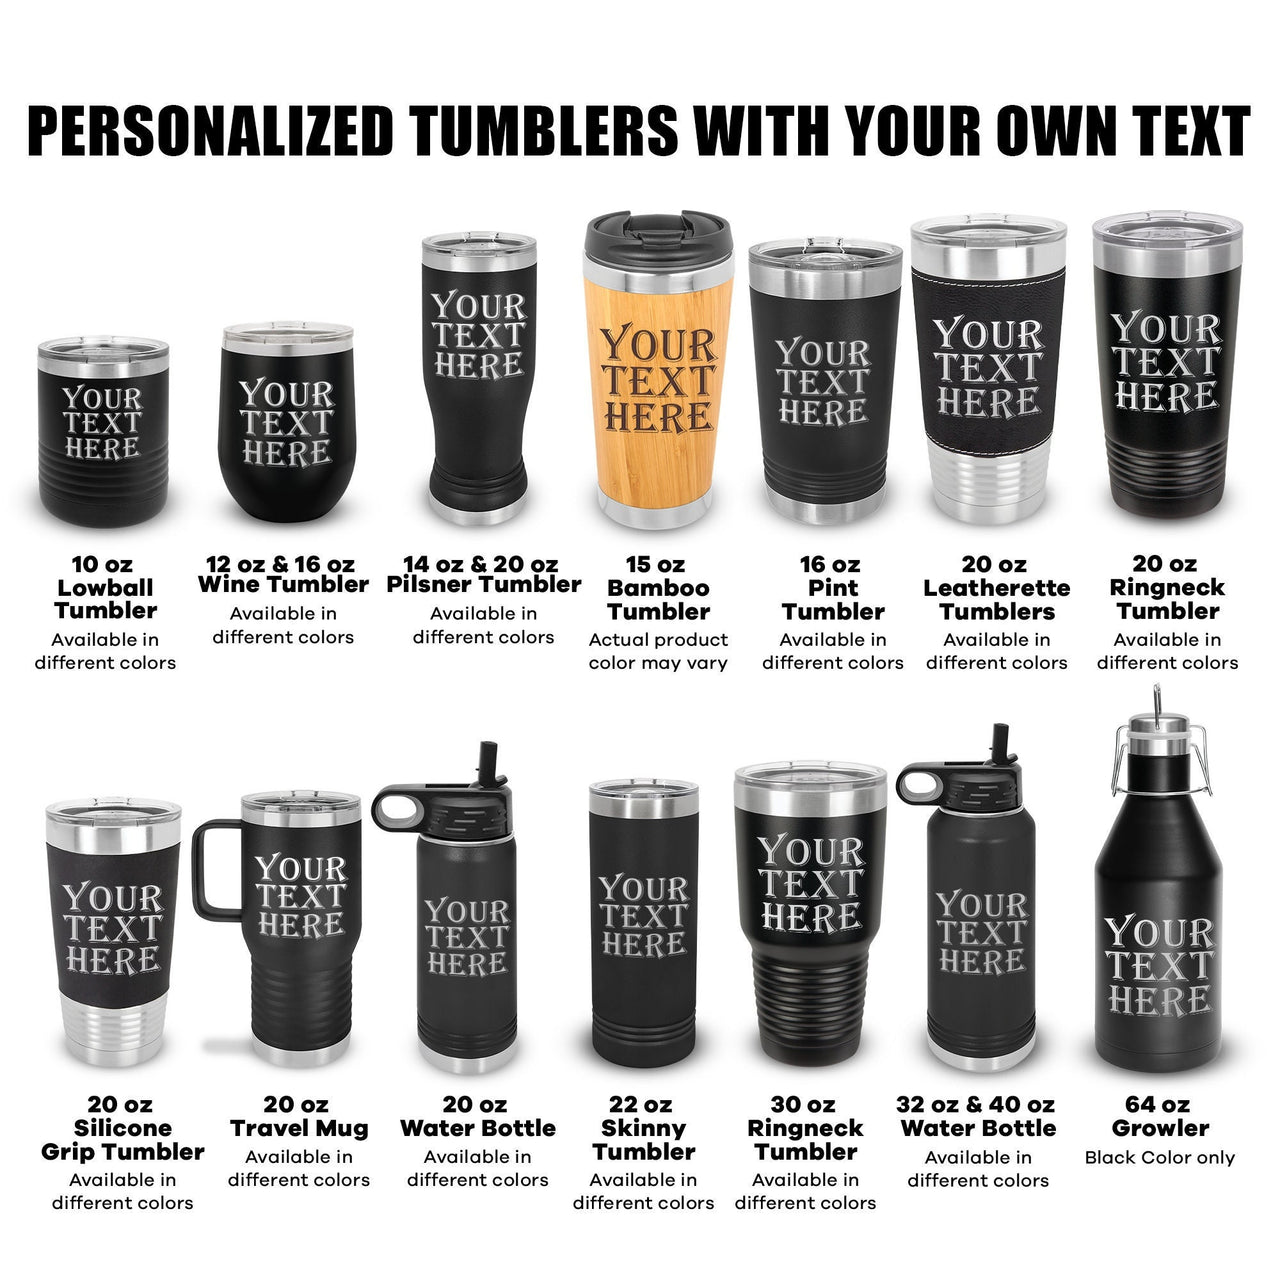 Your Text Here Customized Tumblers, Custom Coffee Tumbler, Custom Wine Tumbler,Custom Made Tumbler for Men,Laser Engraved Tumblers for Women